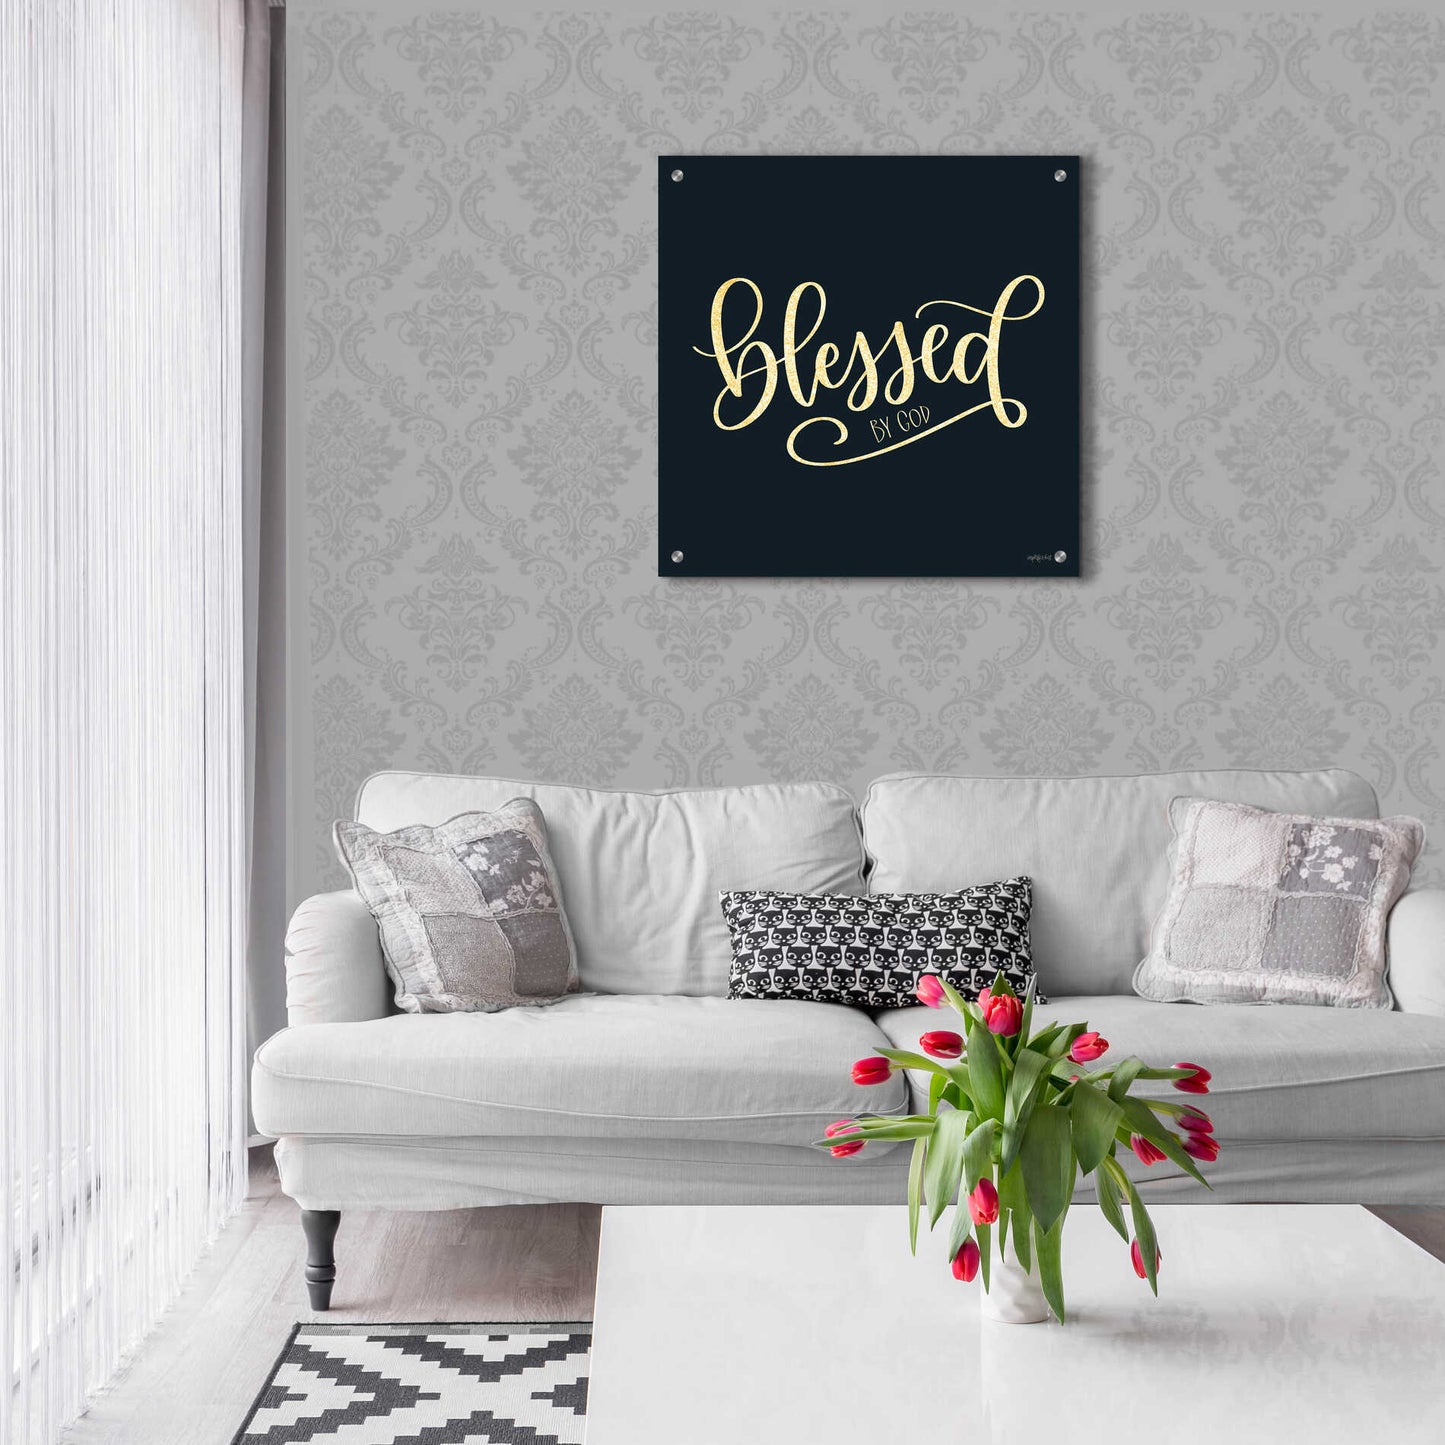 Epic Art 'Blessed By God' by Imperfect Dust, Acrylic Glass Wall Art,24x24